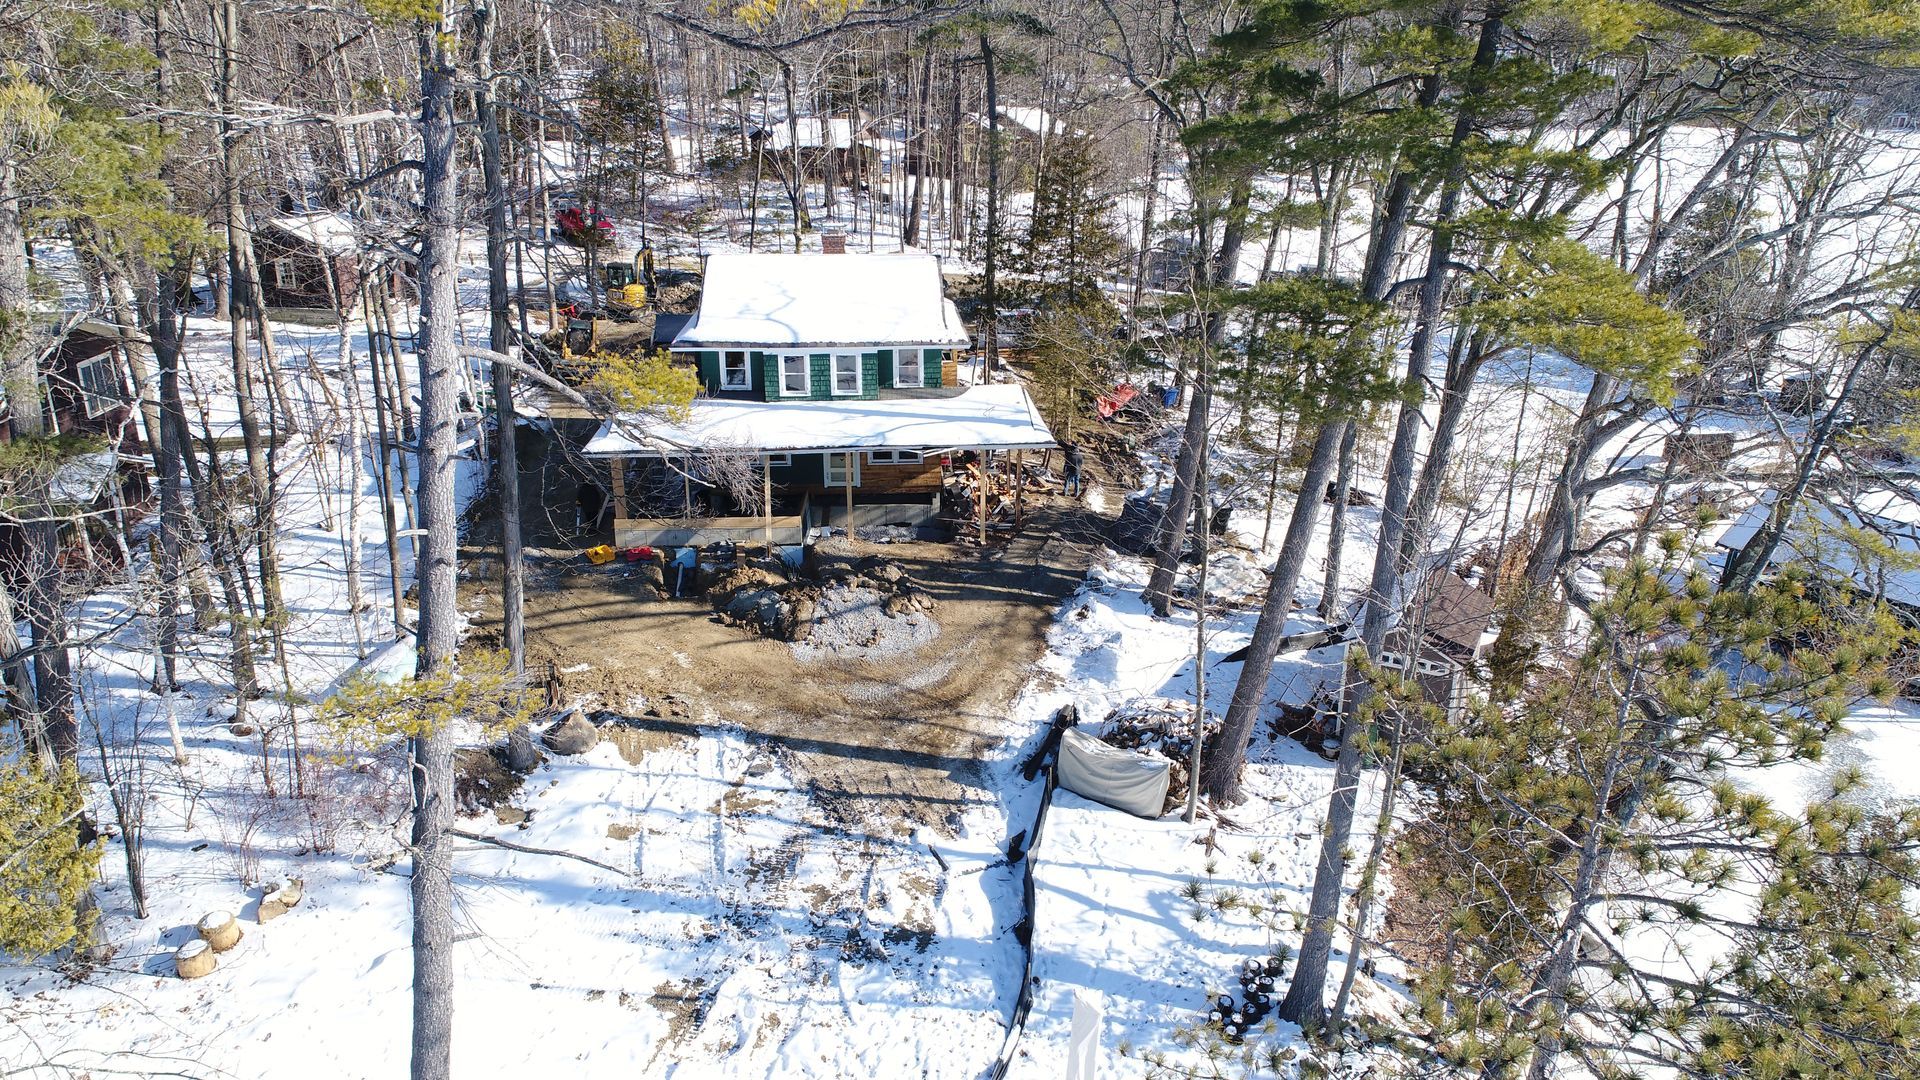 An aerial view of a house in the middle of a snowy forest.